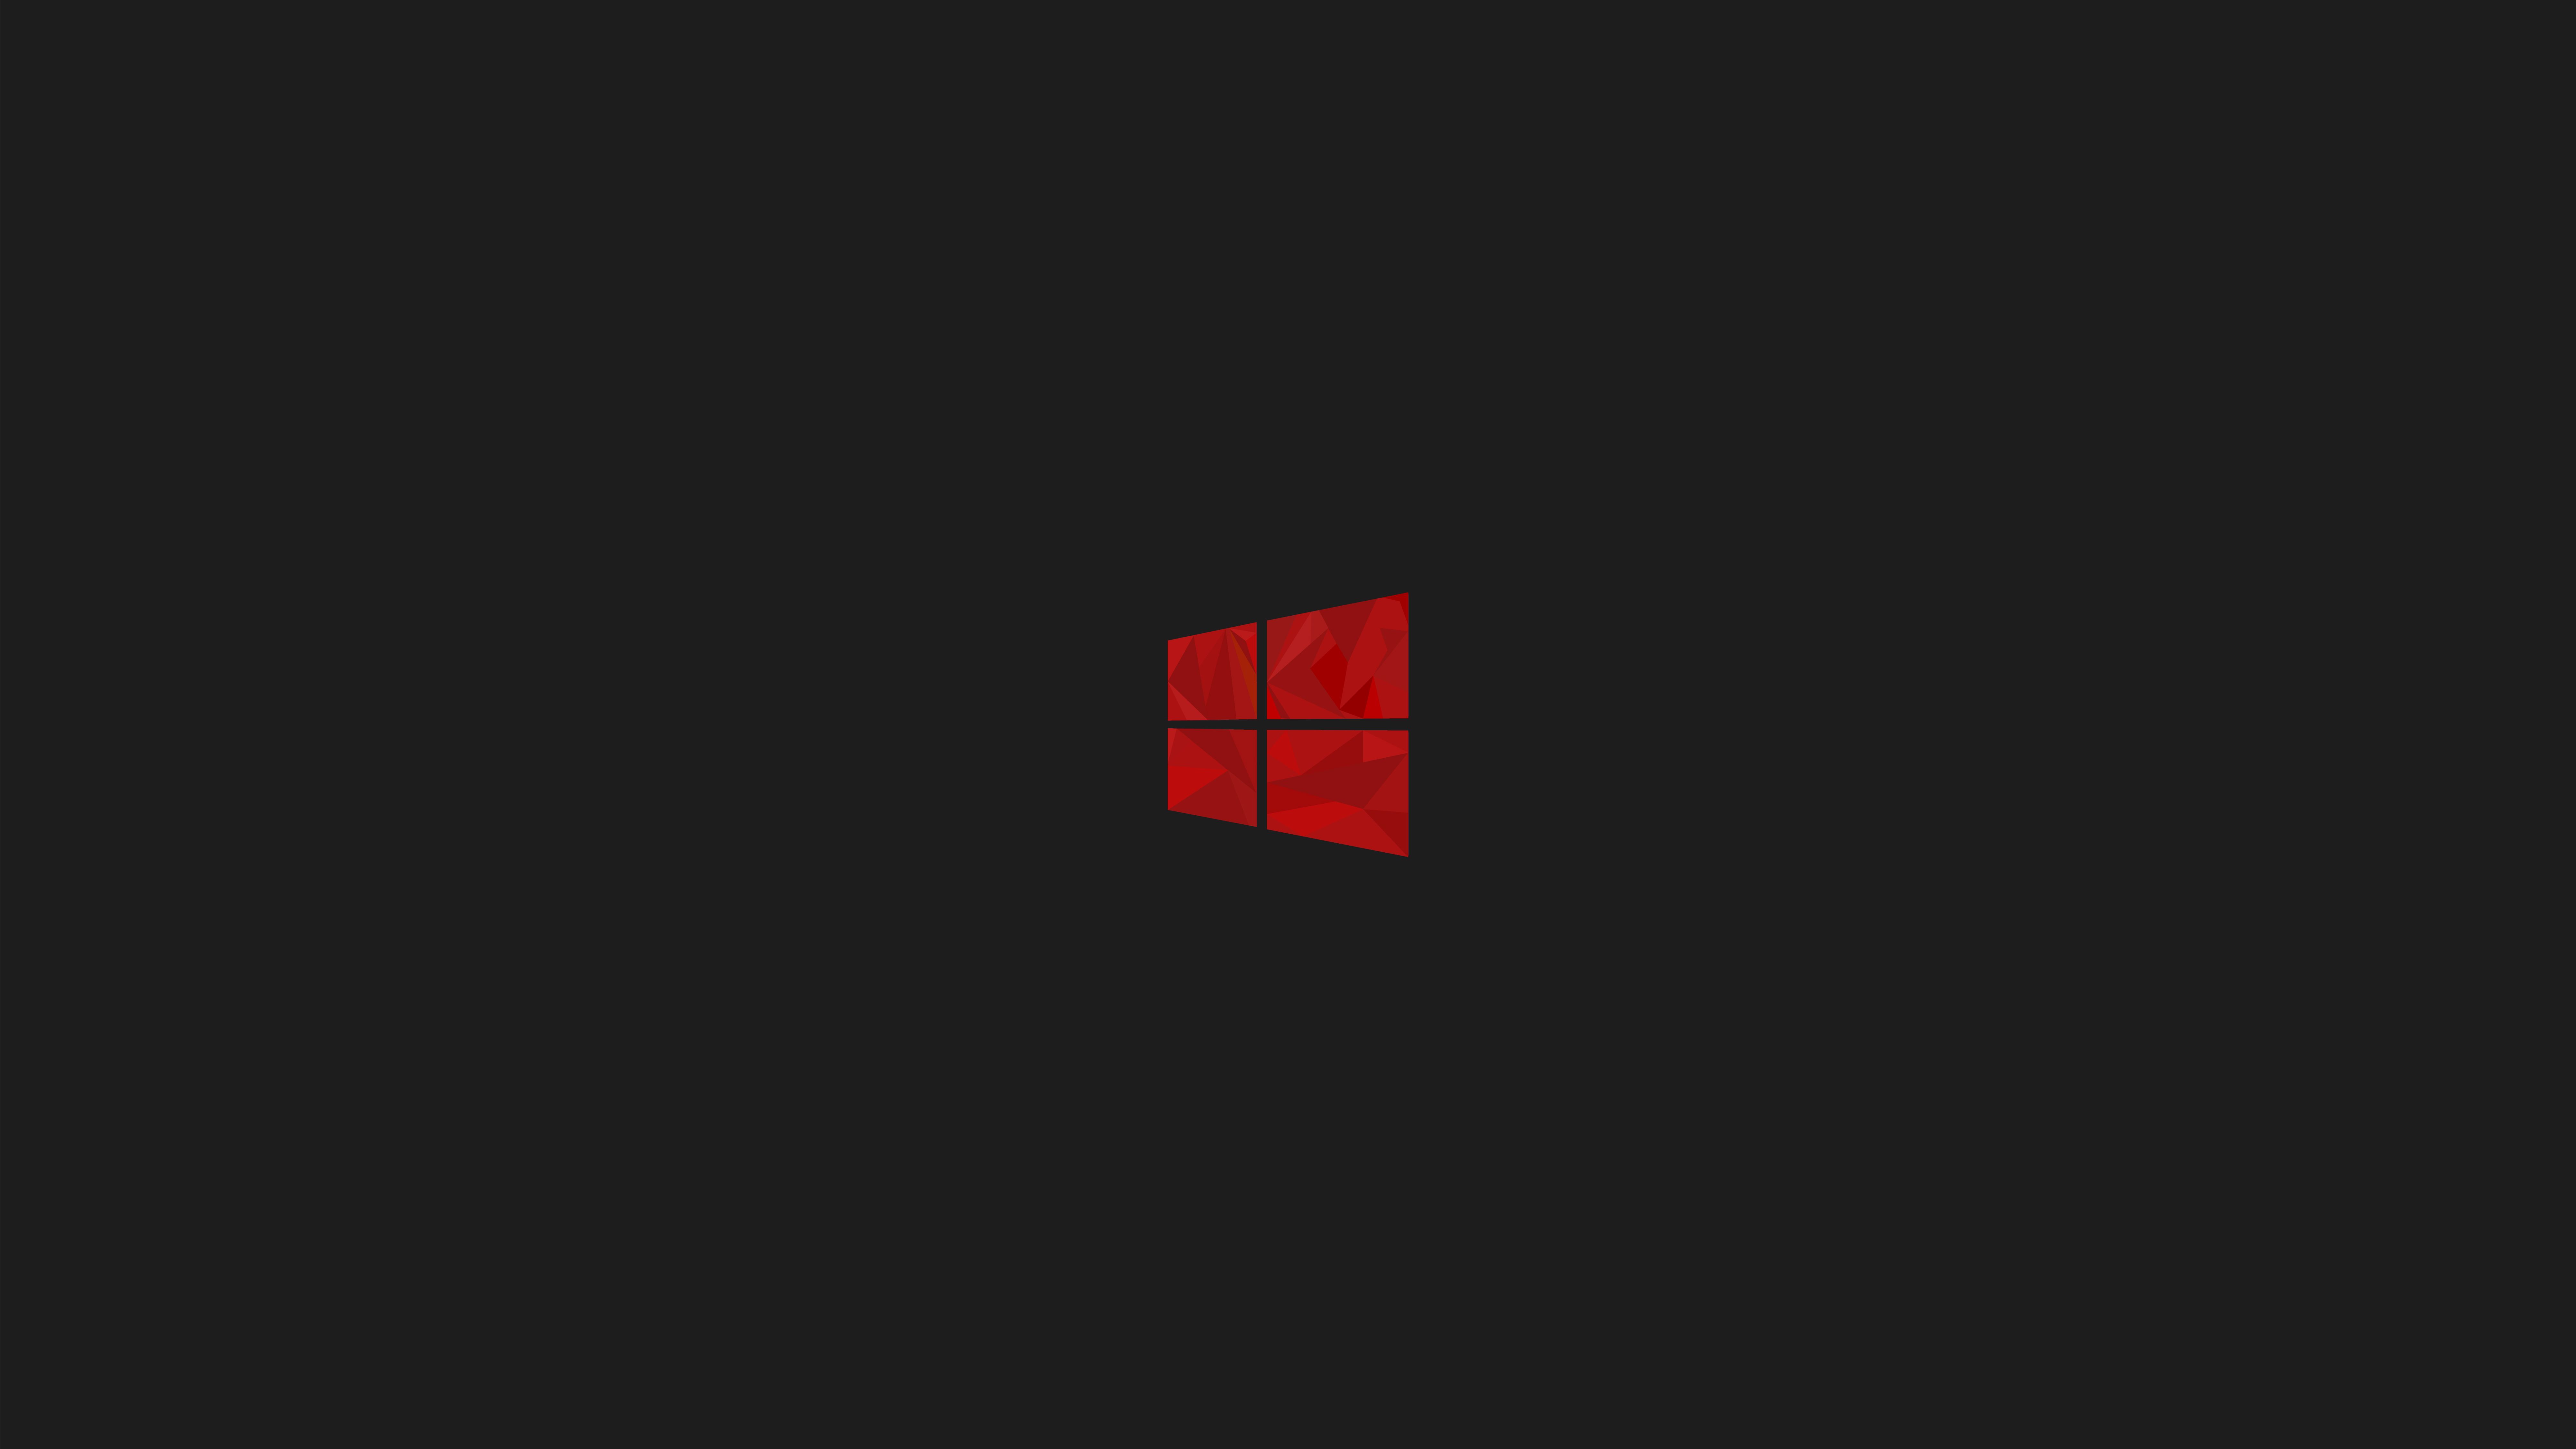 Windows 10 Red Minimal Simple Logo 8k, HD Computer, 4k Wallpaper, Image, Background, Photo and Picture